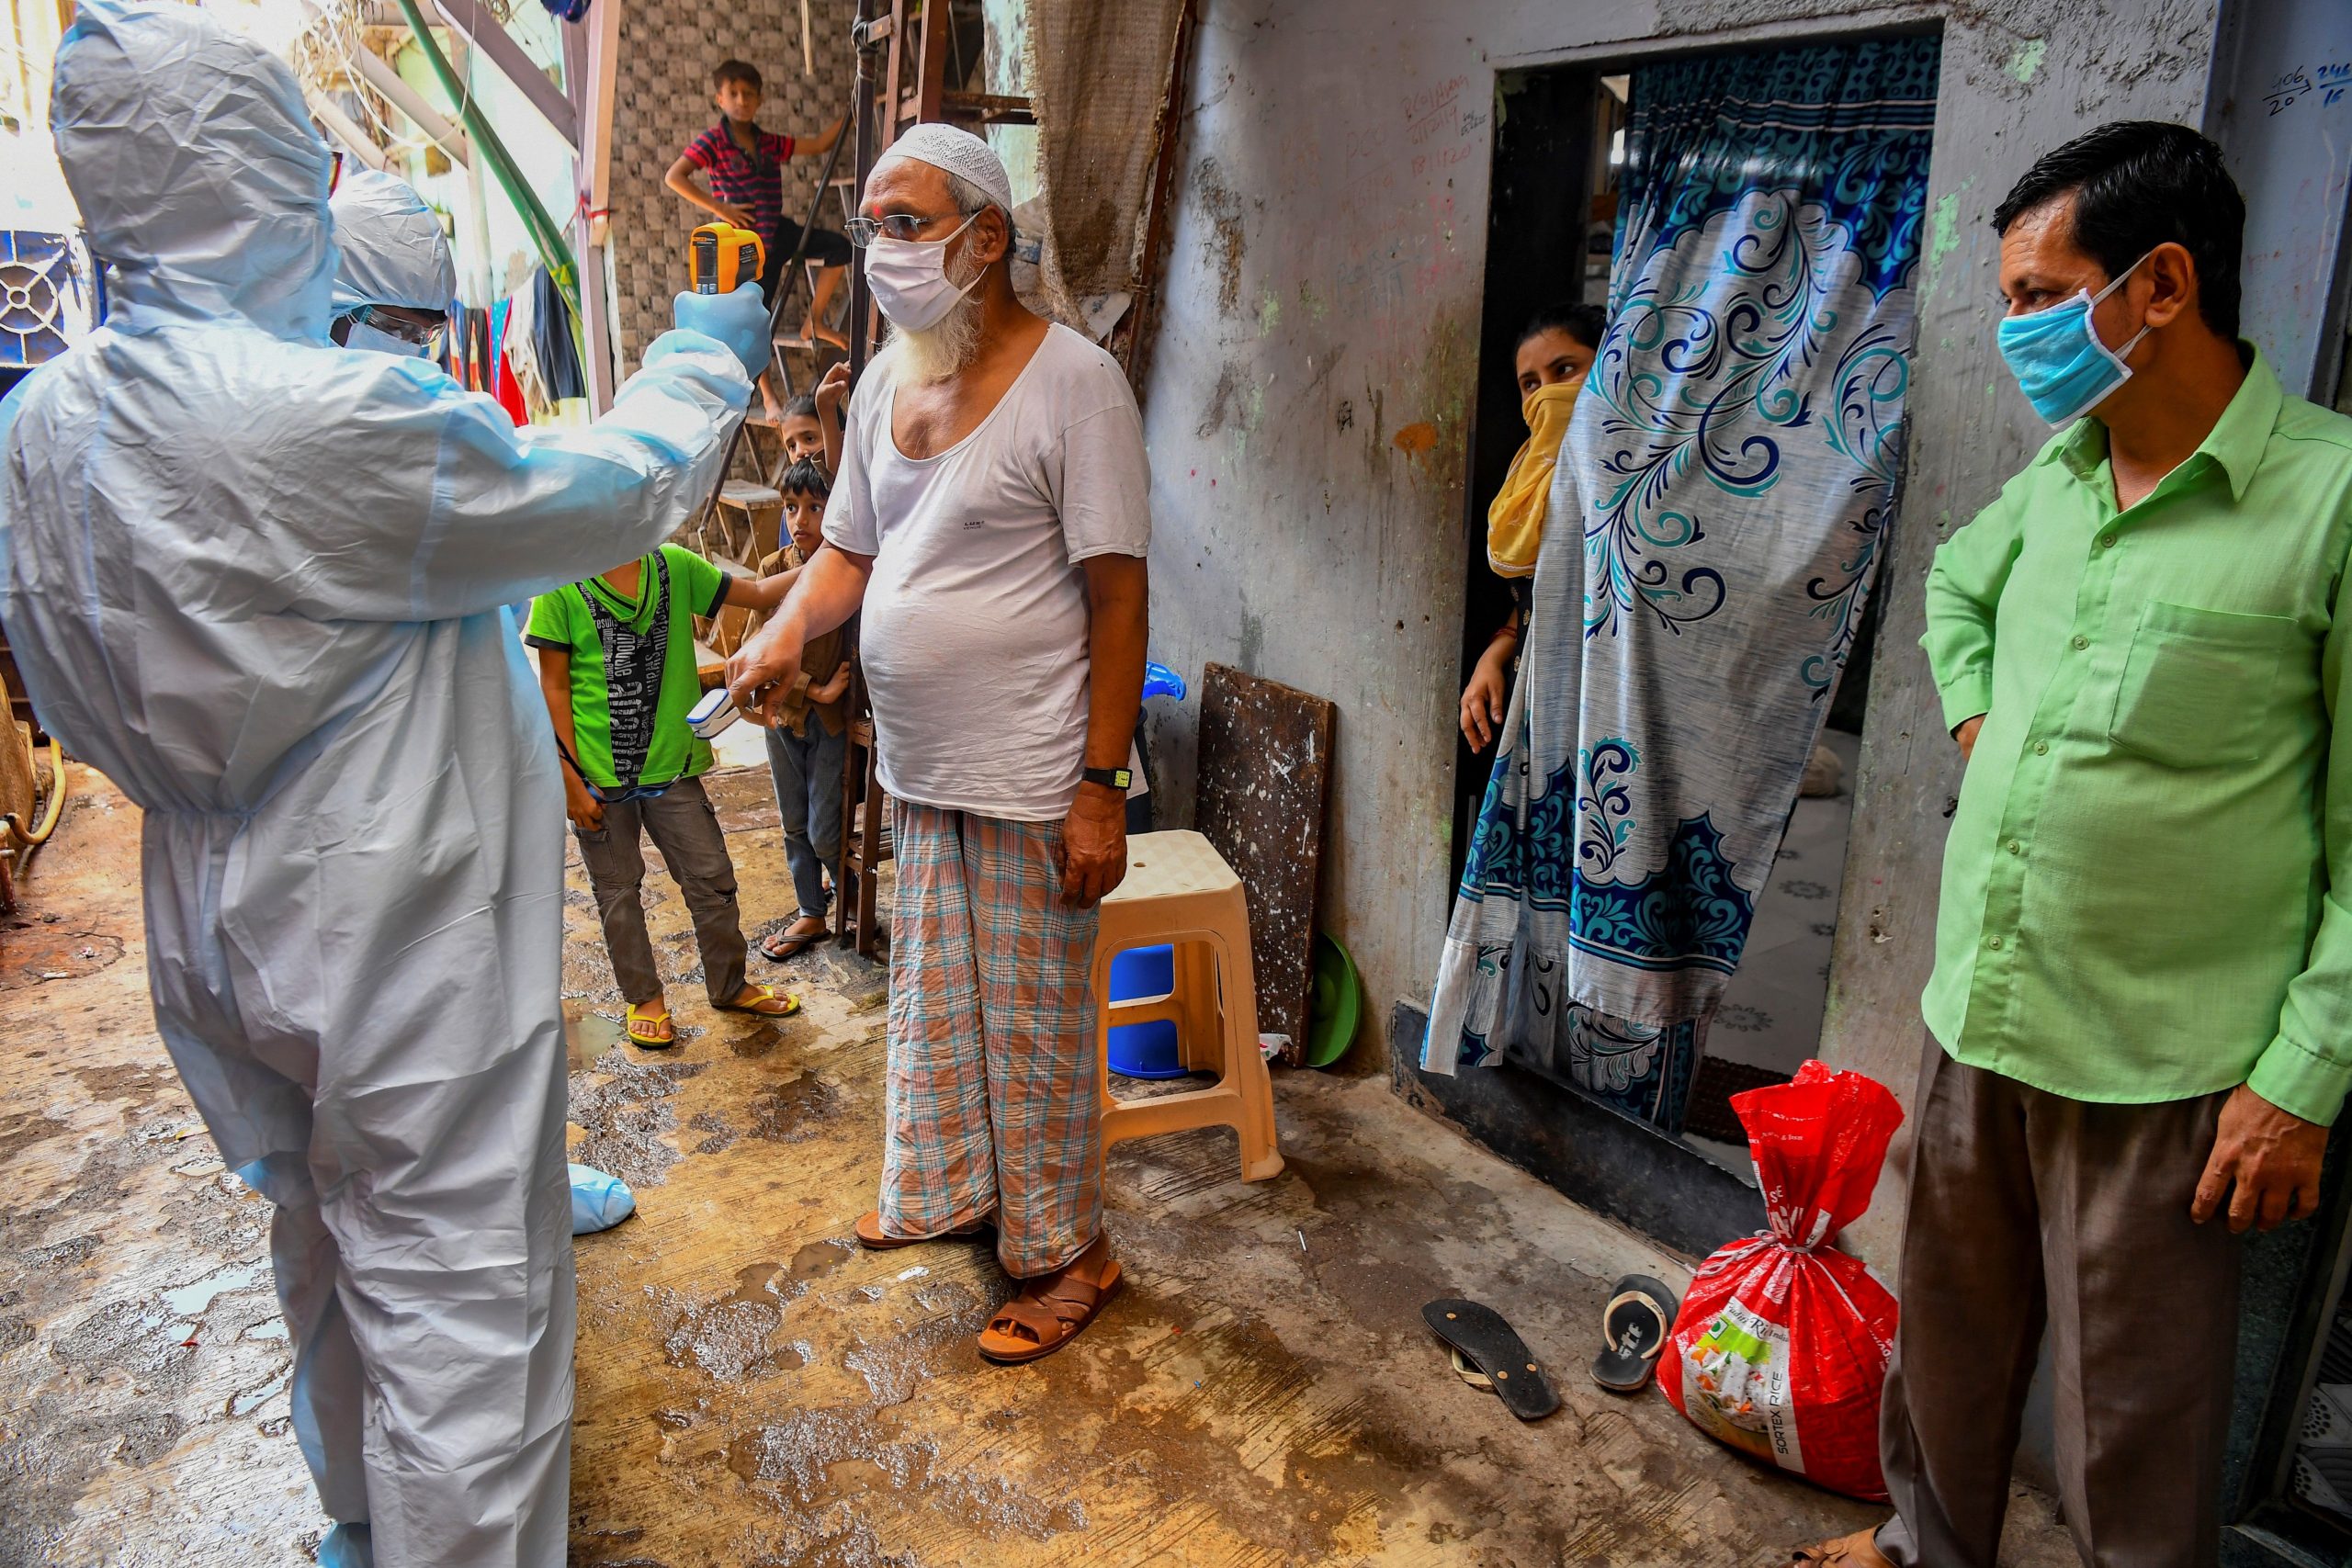 Dharavi, Asia’s largest slum, has recently seen a dip in the number of Coronavirus cases